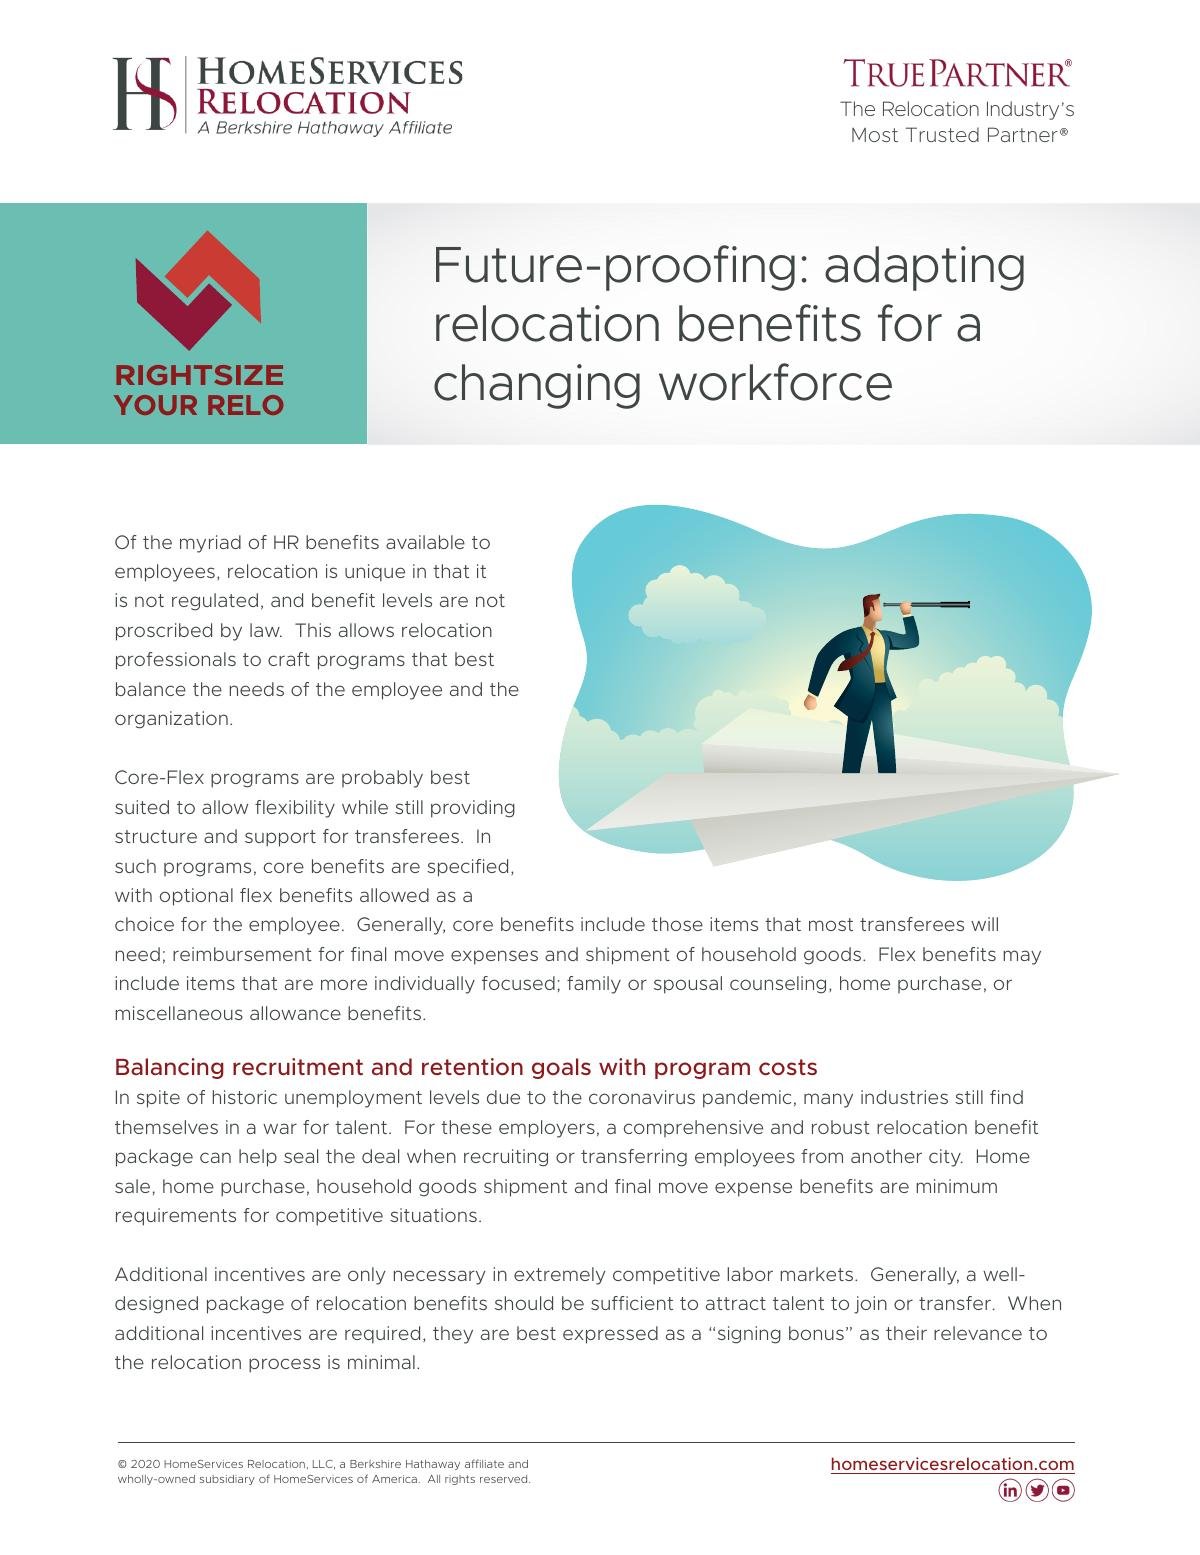 Future-proofing: adapting relocation benefits for a changing workforce